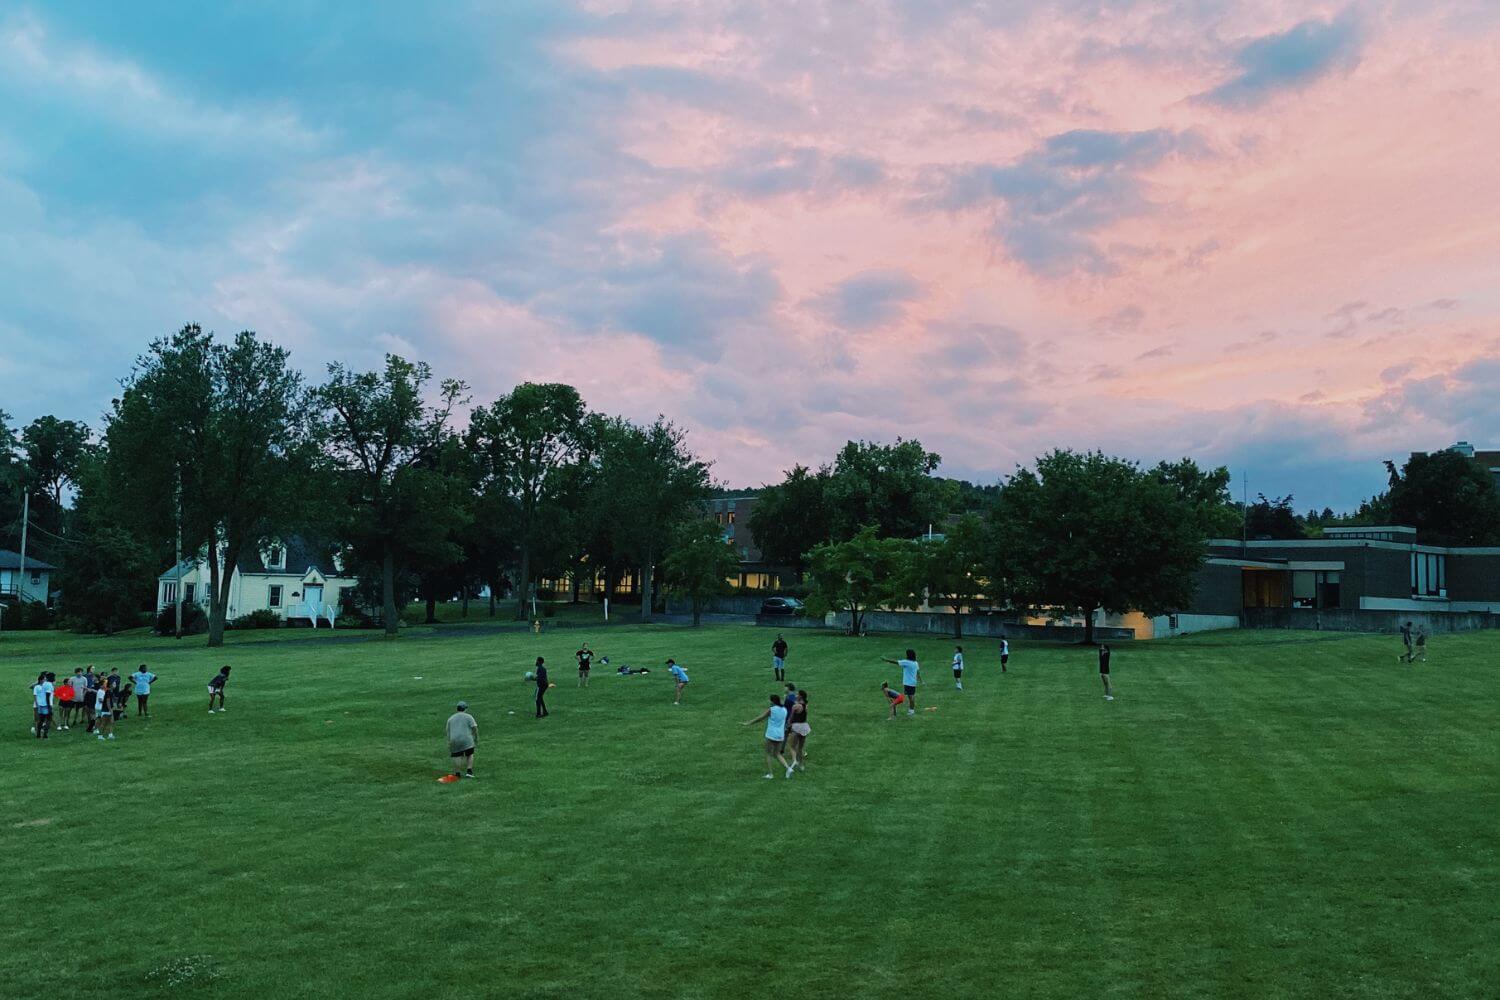 Group of summer campers are on a large field at sunset playing a game of kickball